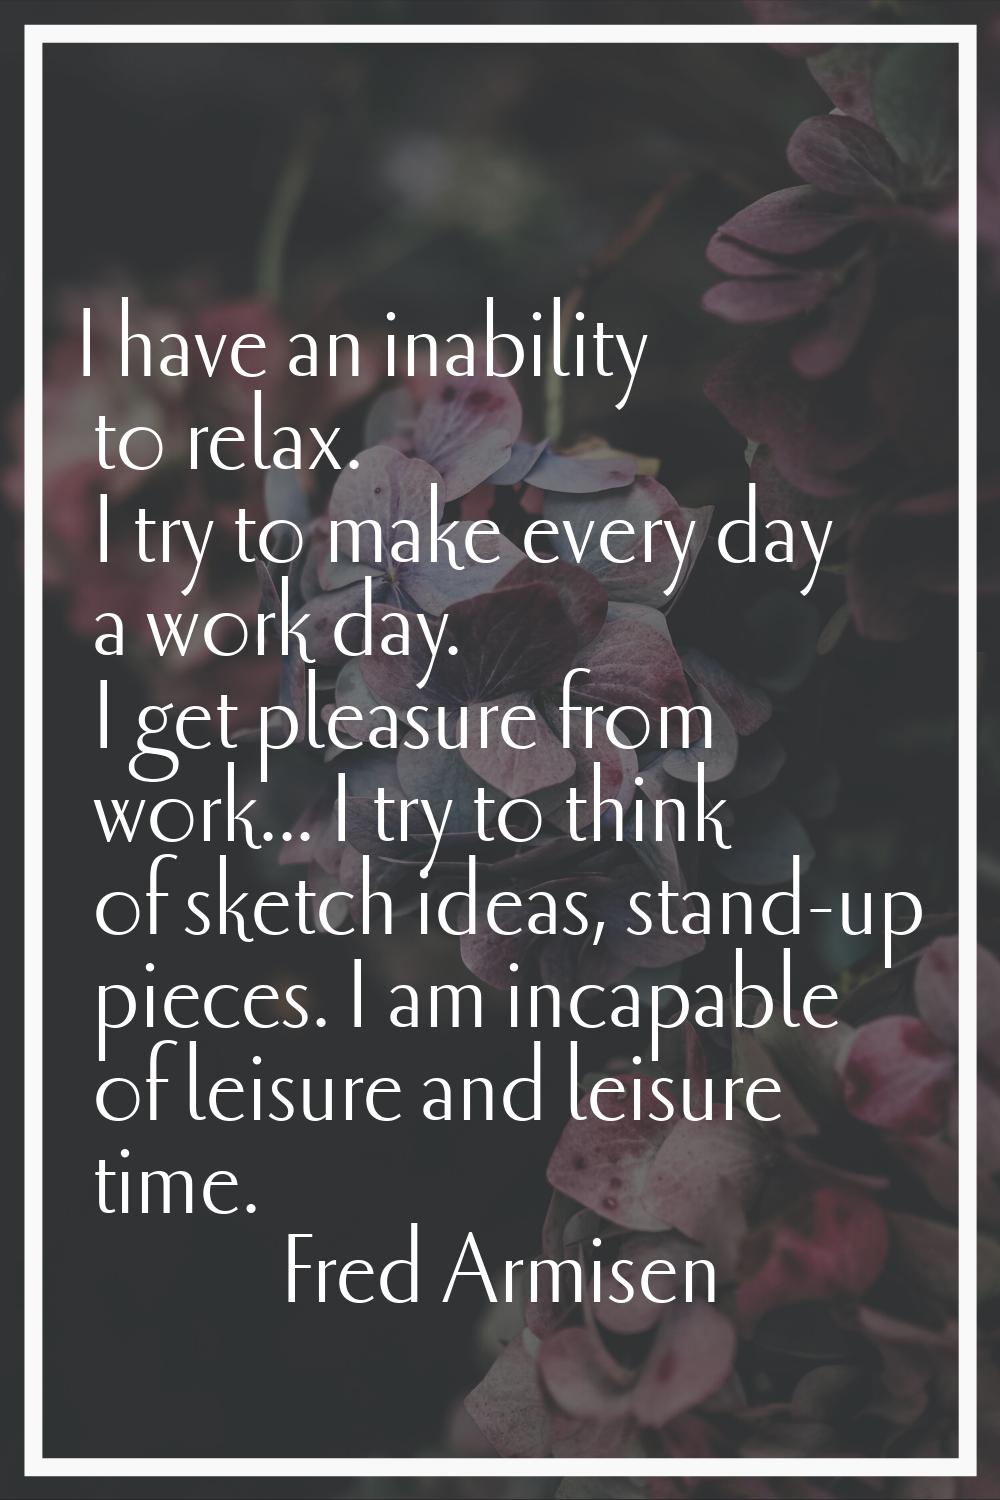 I have an inability to relax. I try to make every day a work day. I get pleasure from work... I try